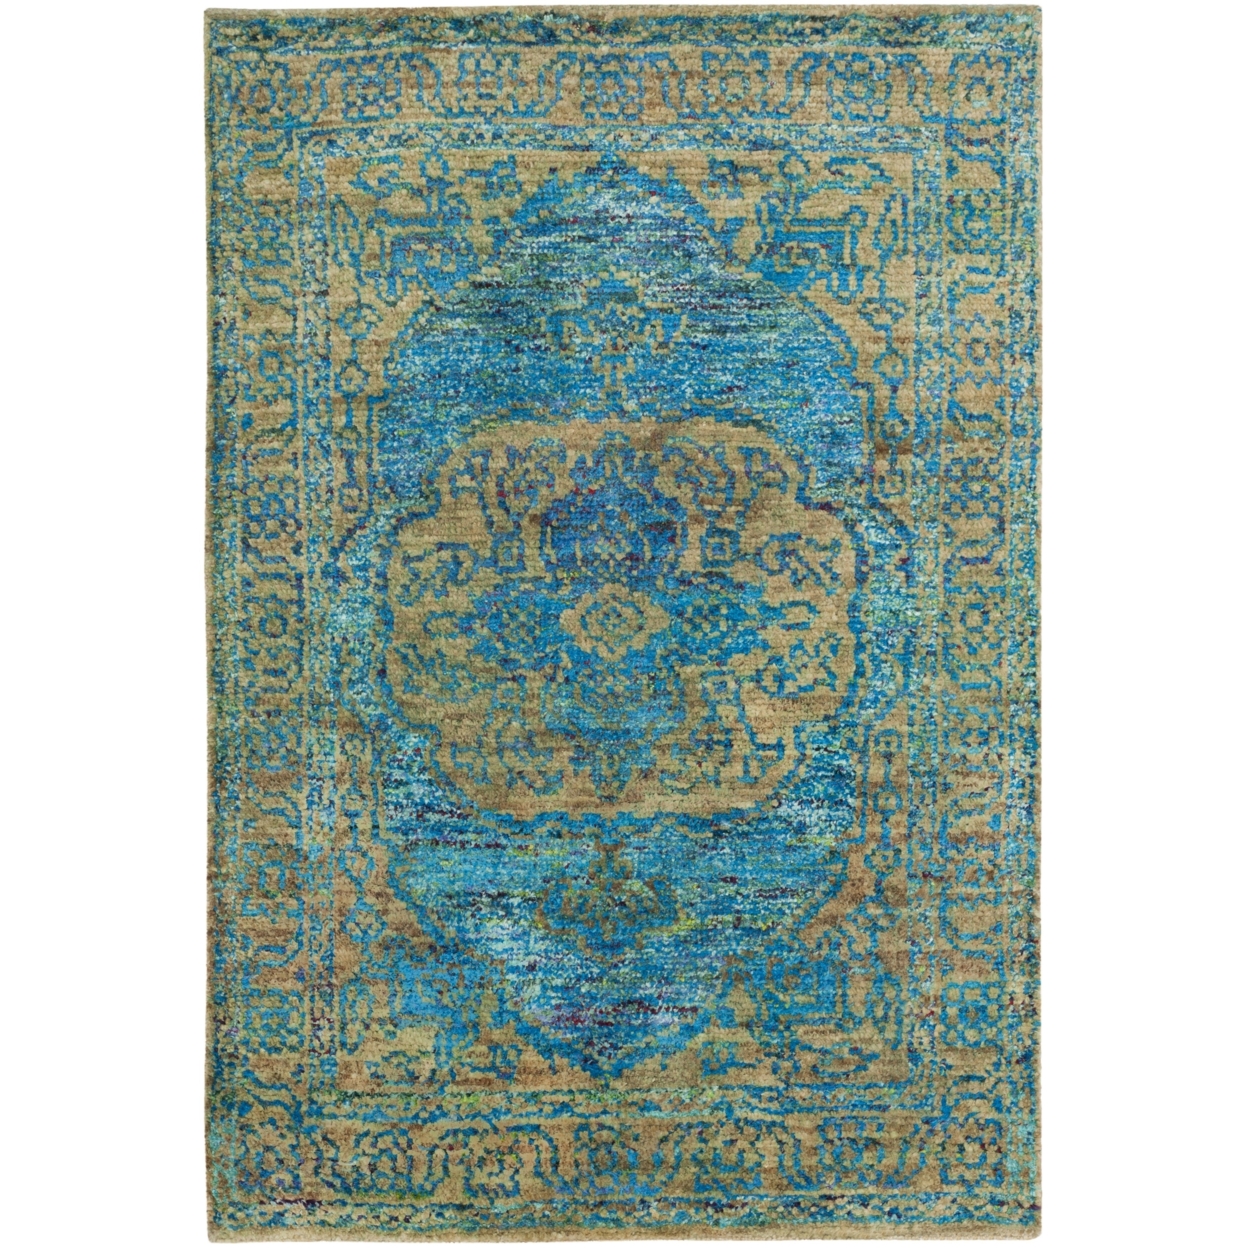 SAFAVIEH Tangier TGR603B Hand-knotted Teal / Beige Rug - 8' X 10'